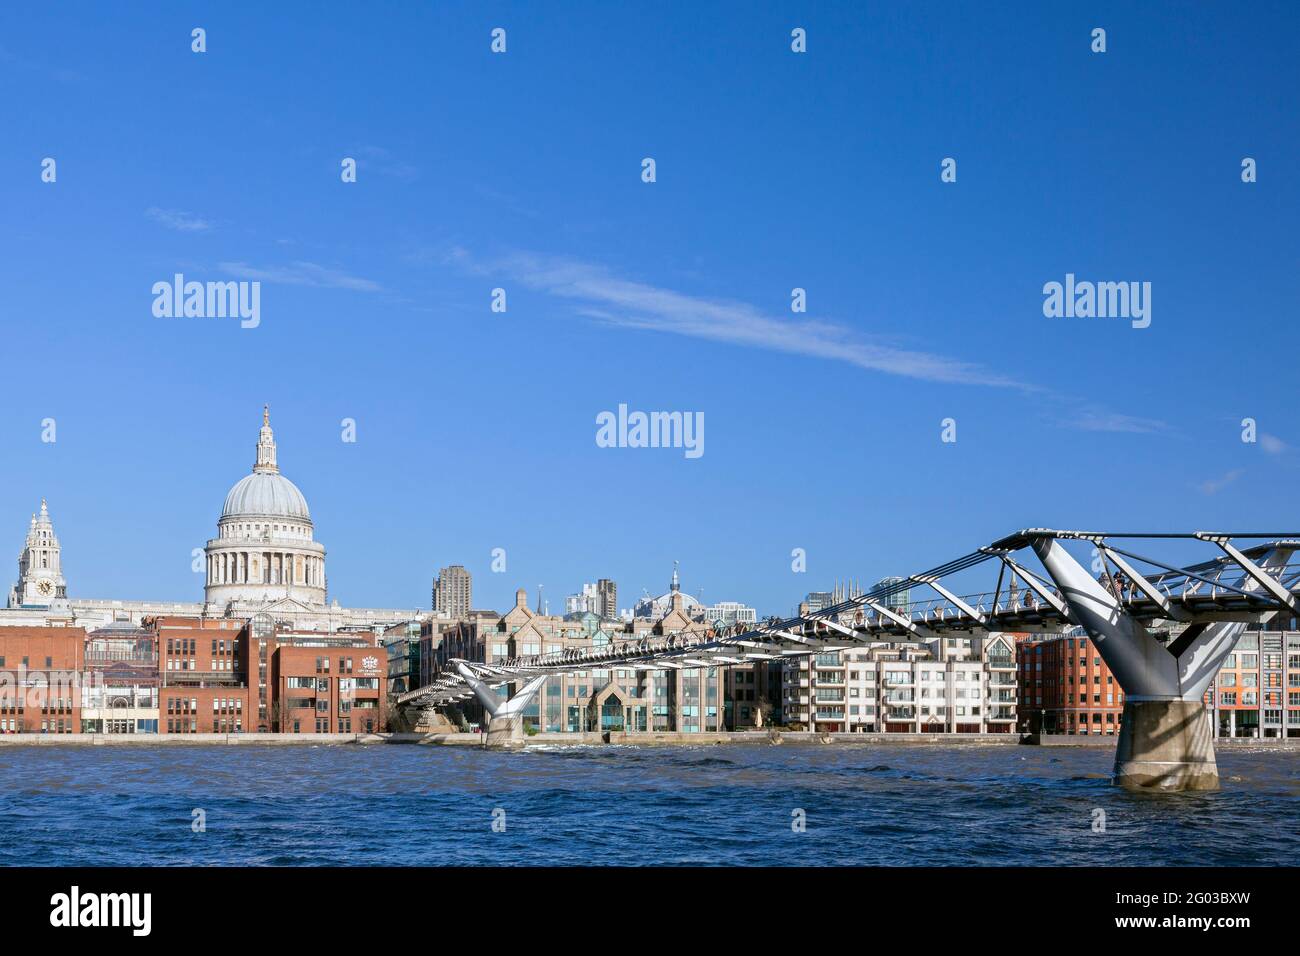 UK, England, London, Bankside, The London Millennium Footbridge with St Paul's Cathedral Stock Photo